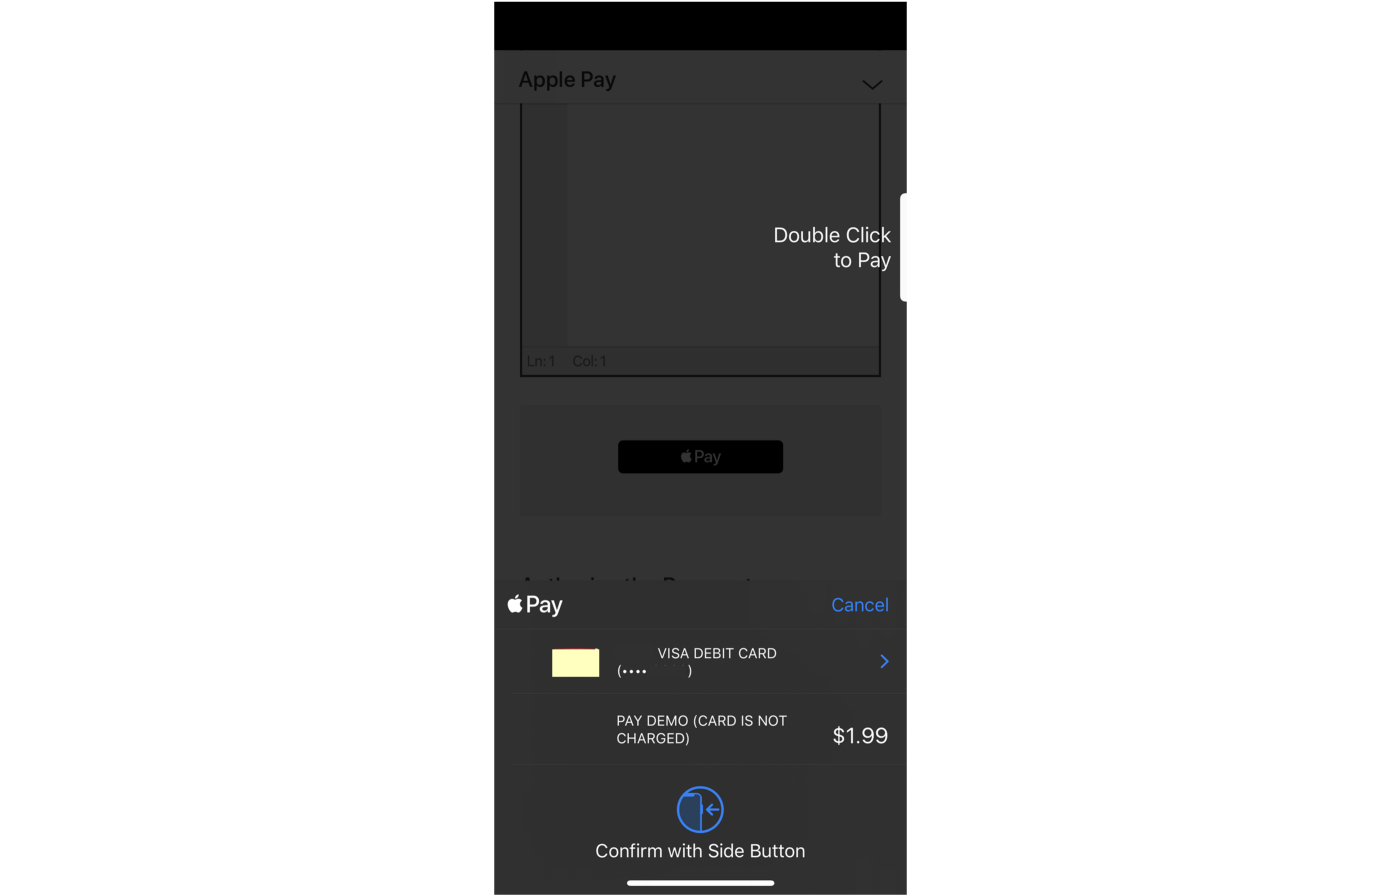 Apple Pay working within a standalone PWA